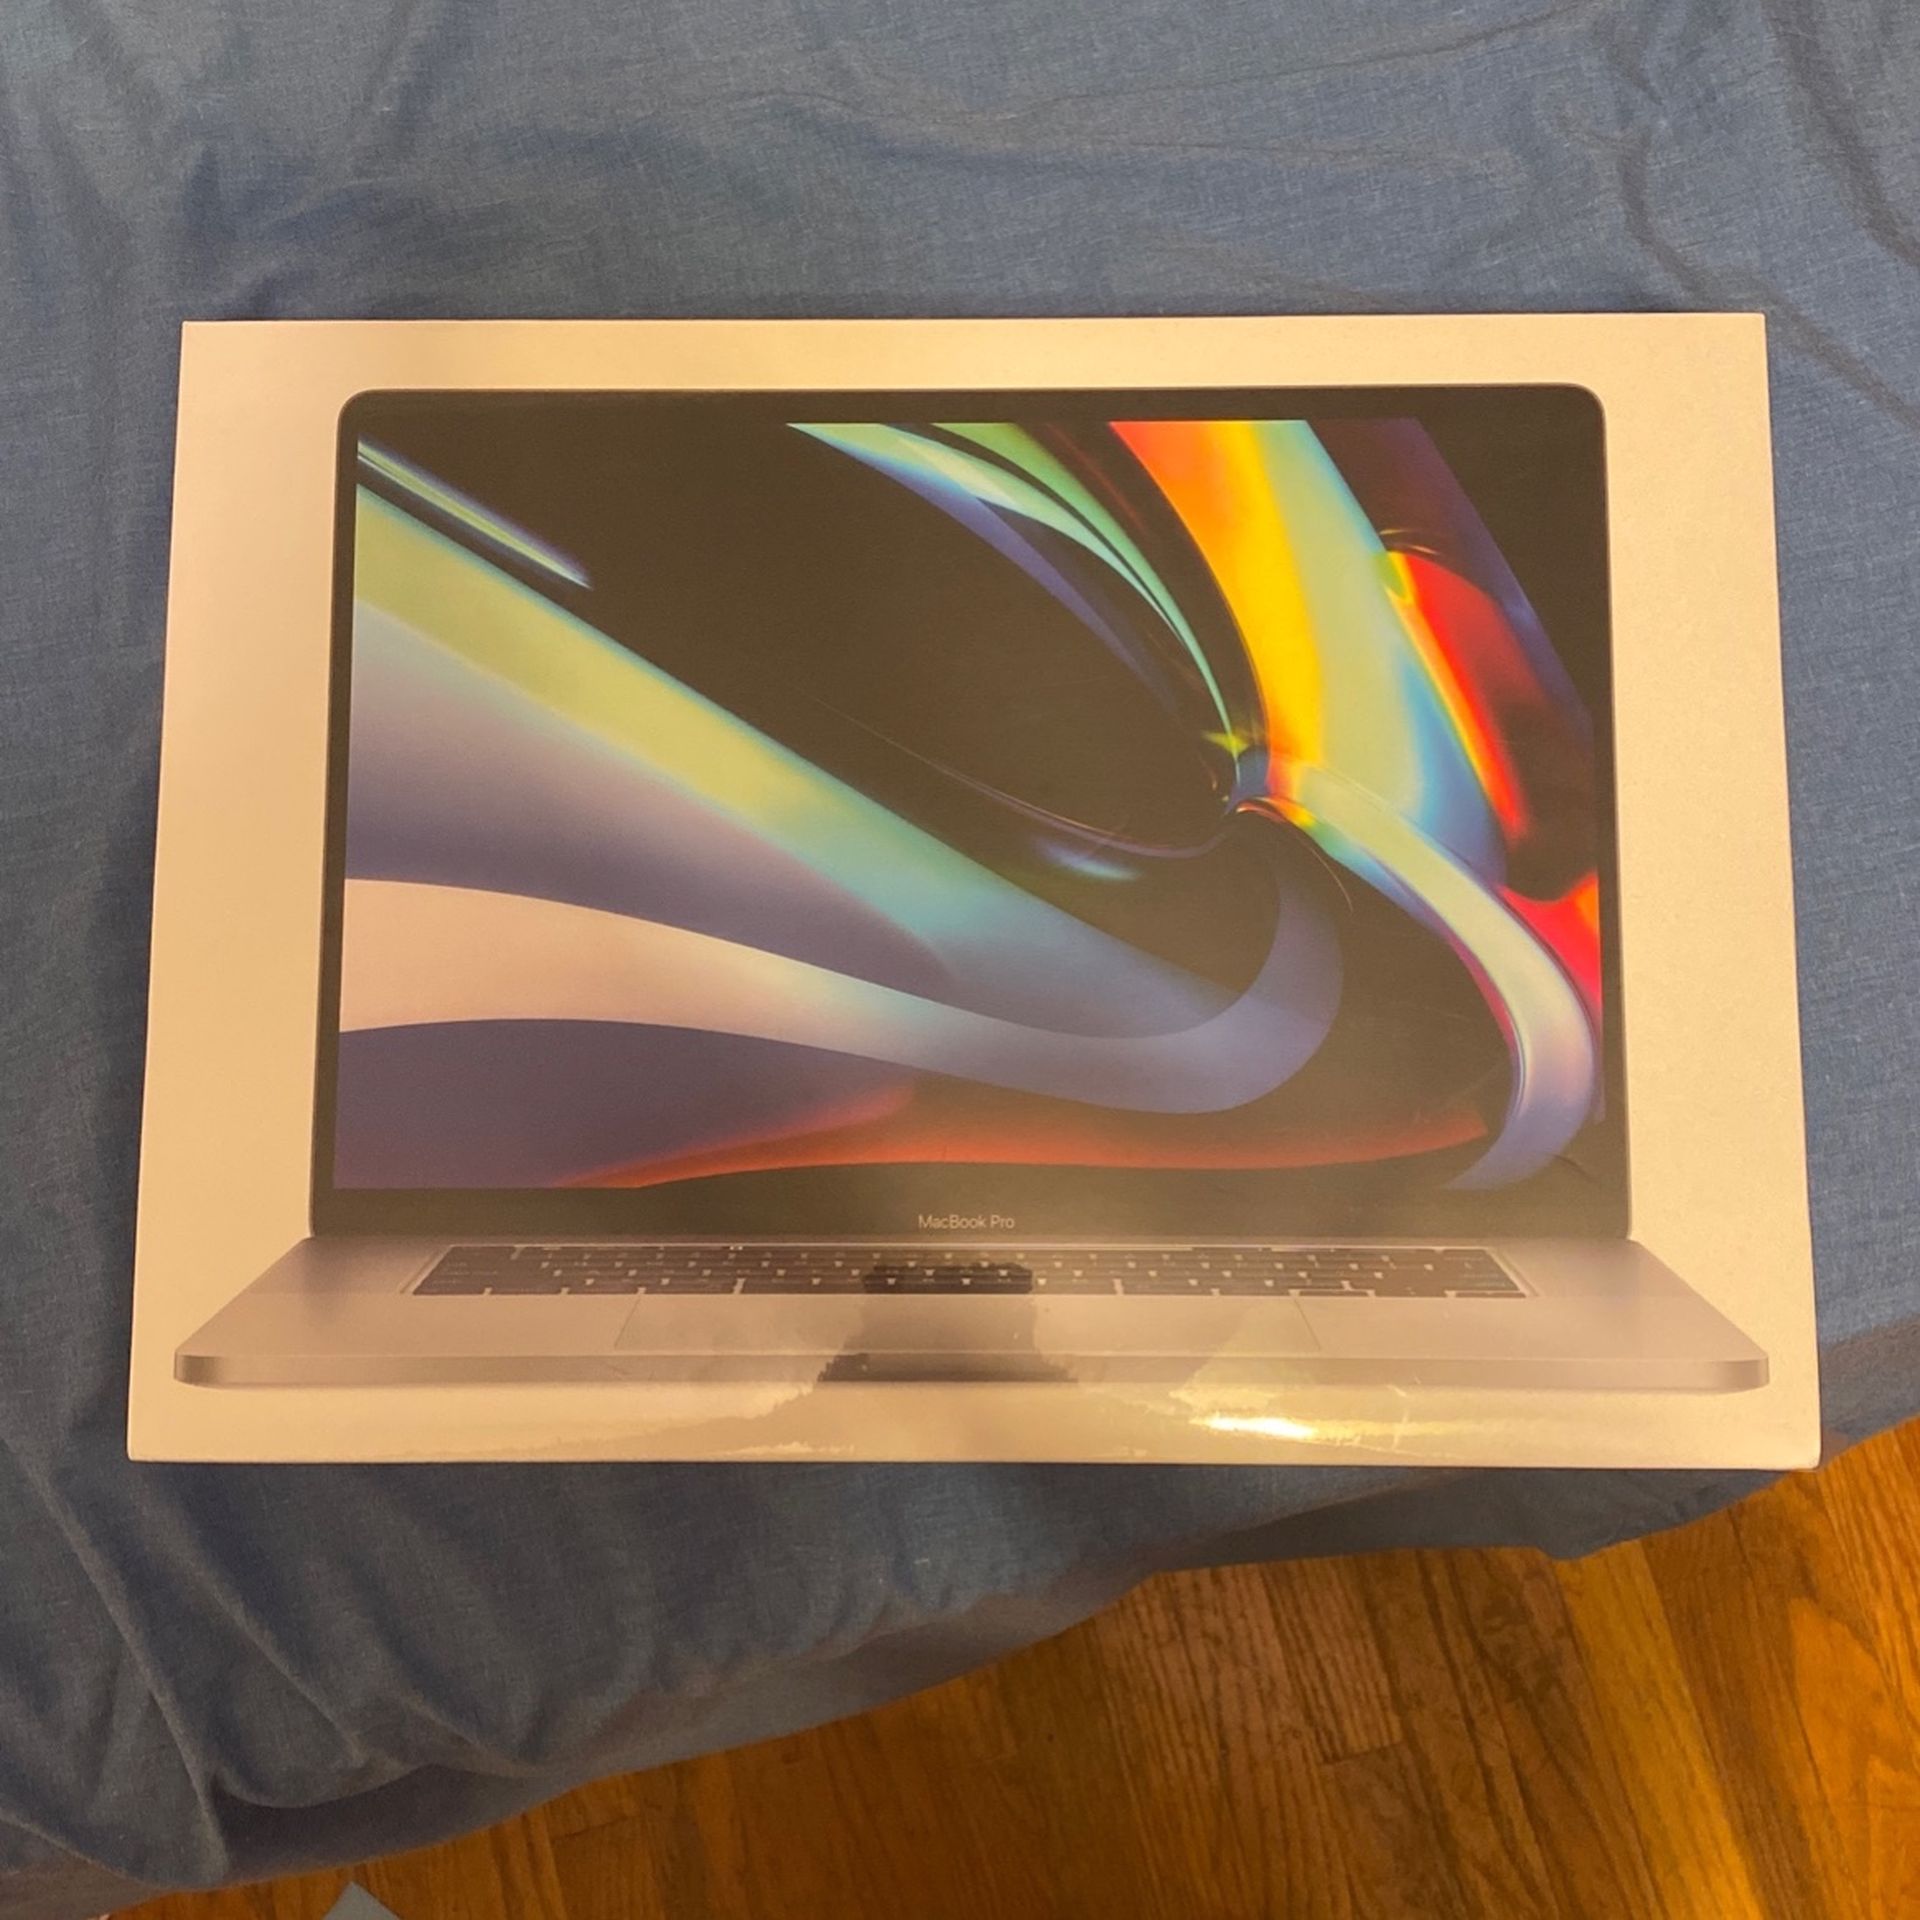 MacBook Pro - 16" Display with Touch Bar - Intel Core i7 - 16GB Memory - AMD Radeon Pro 5300M - 512GB SSD (Latest Model) - Space Gray